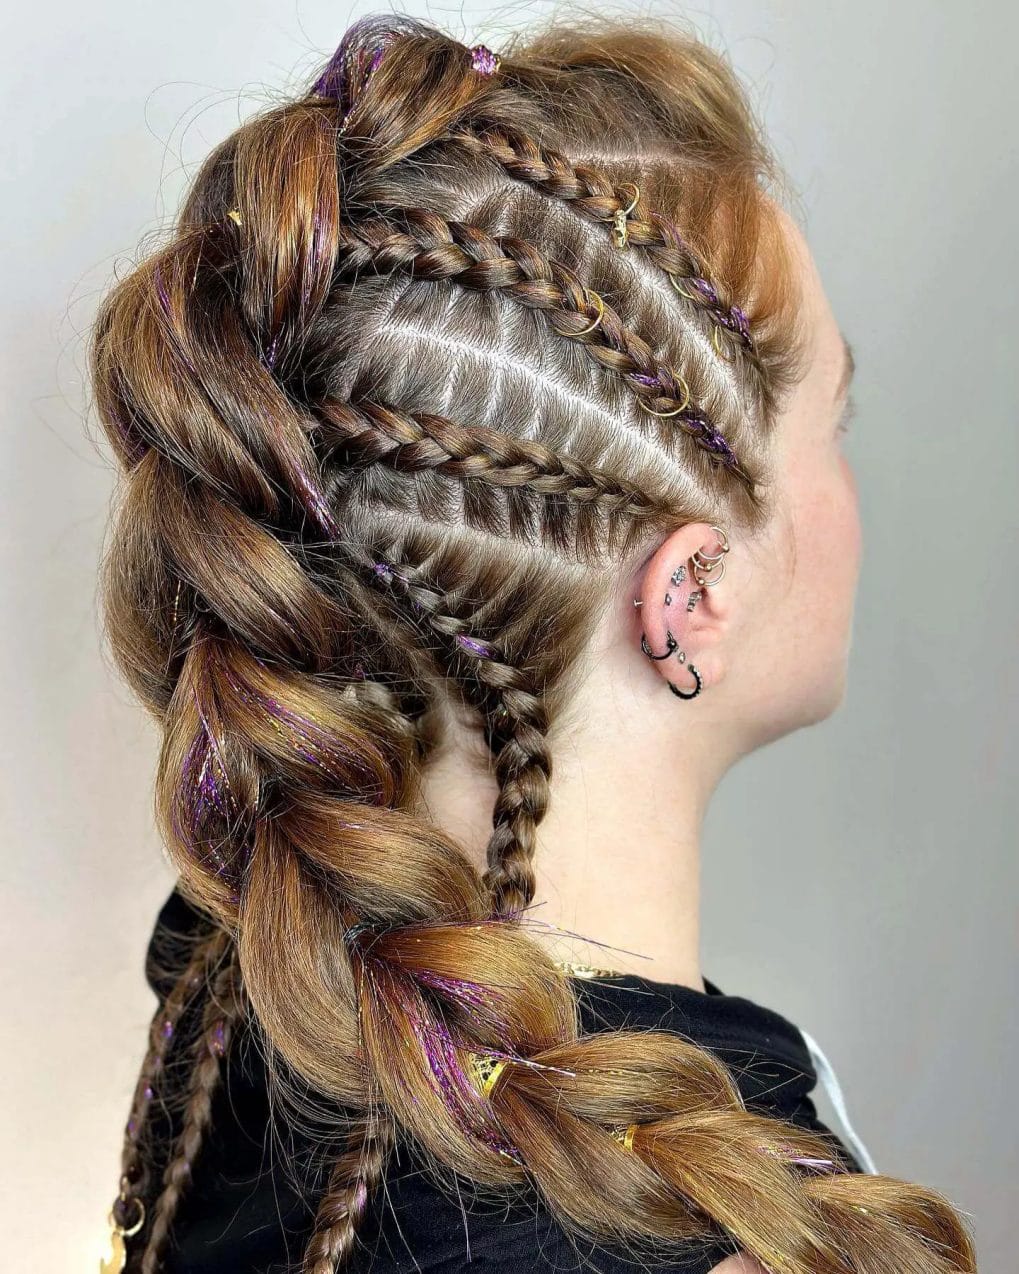 Chestnut and golden streaked Viking braids with purple tinsel highlights.